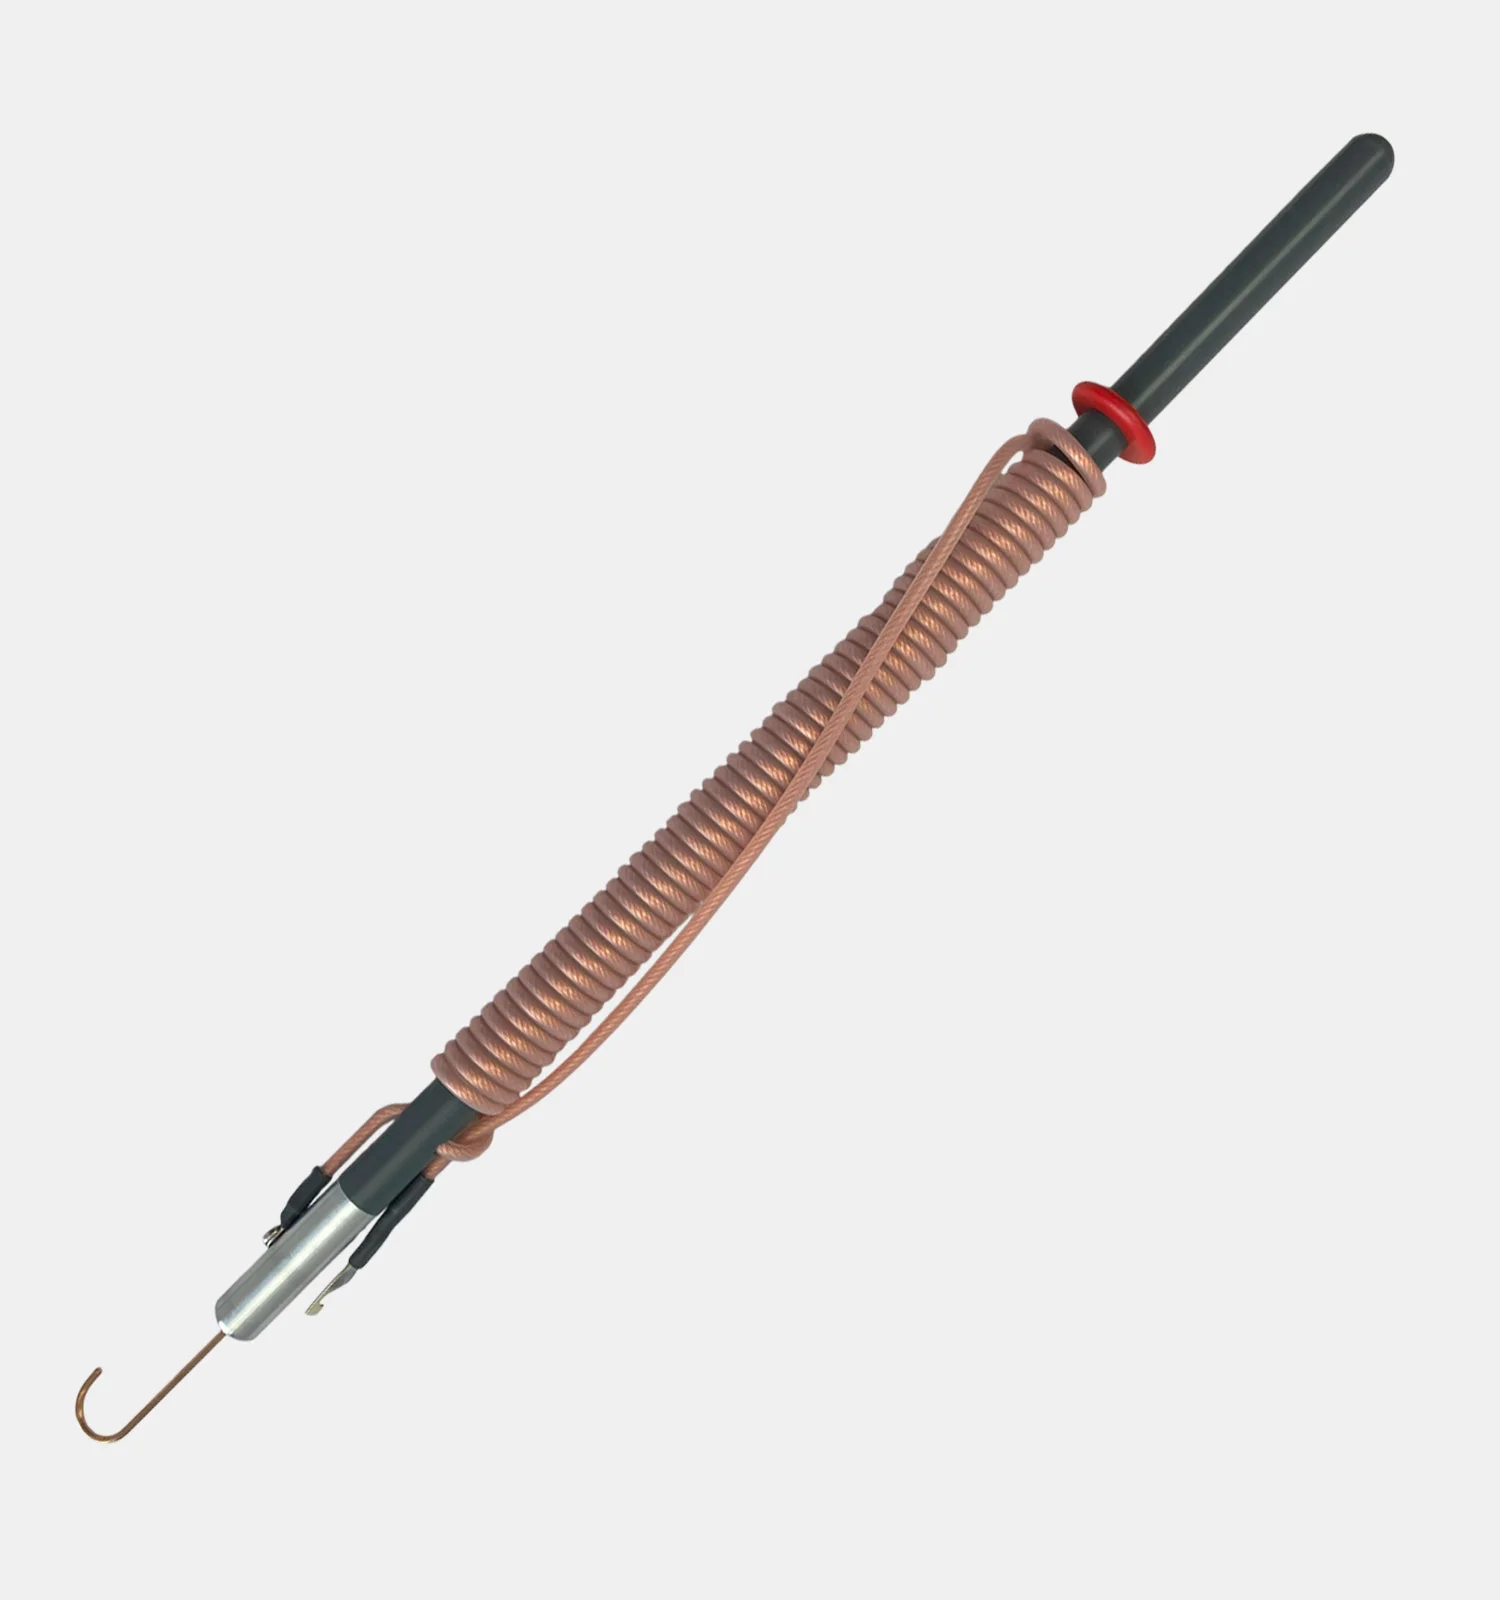 Suppliers of ES30 Earthing Stick